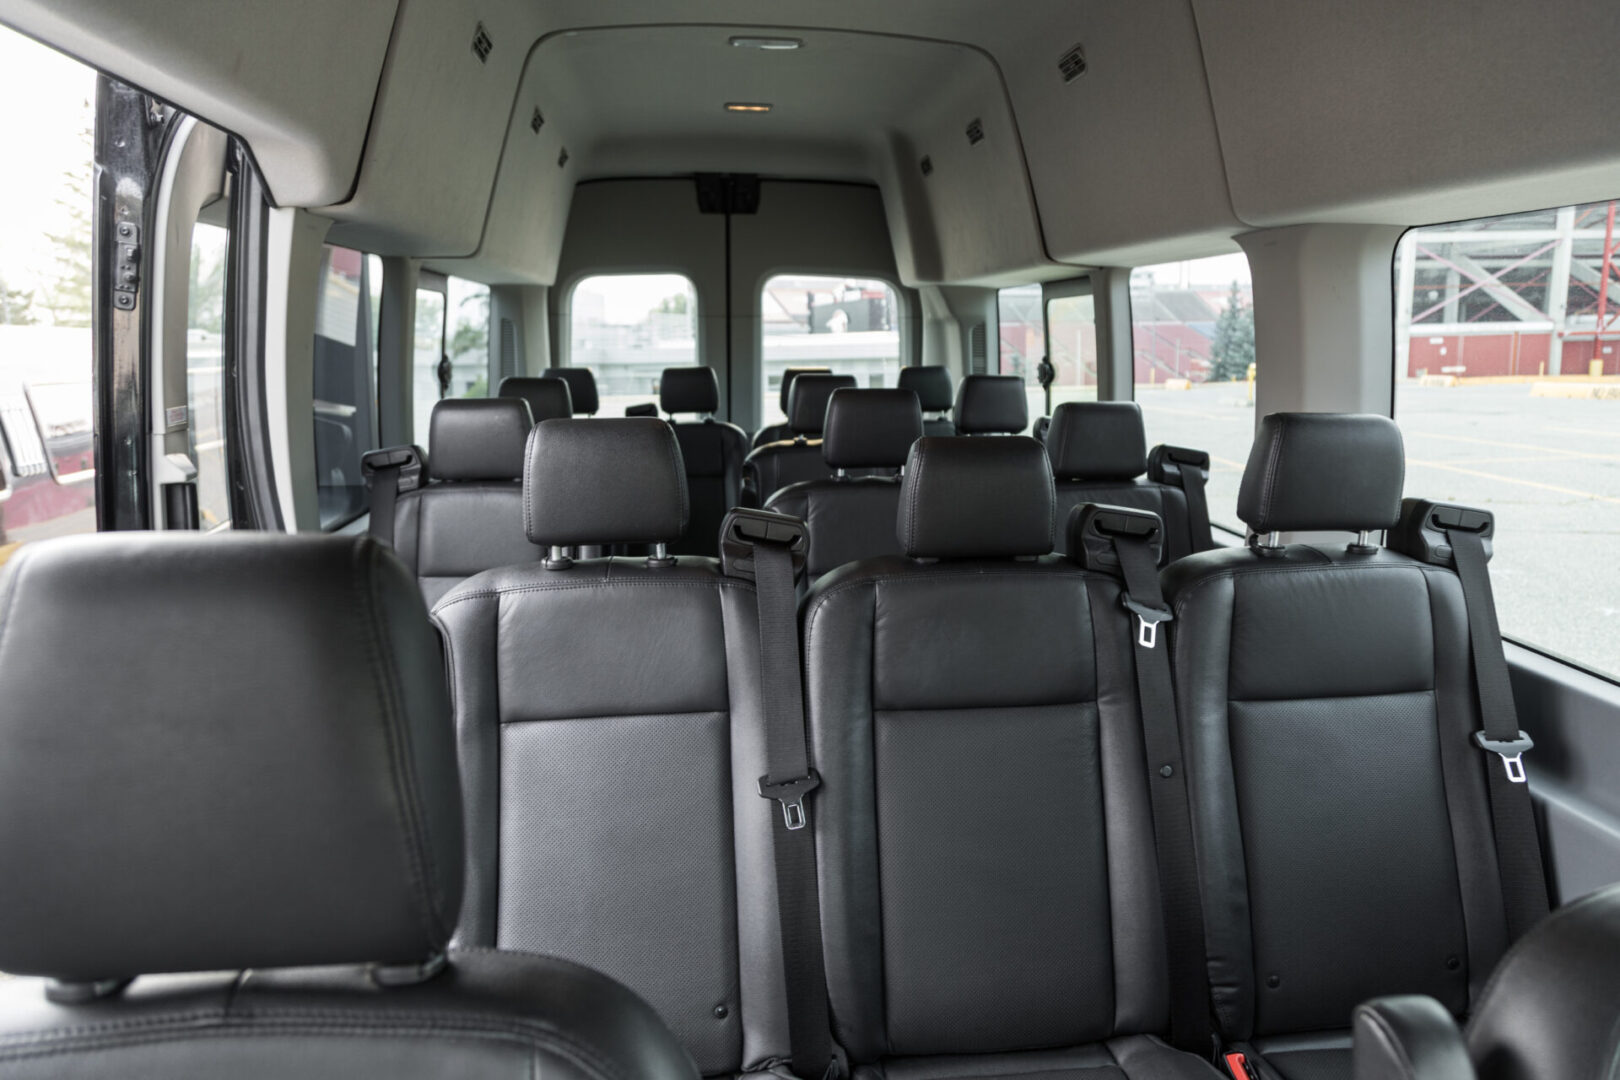 A view of the back seats in a van.